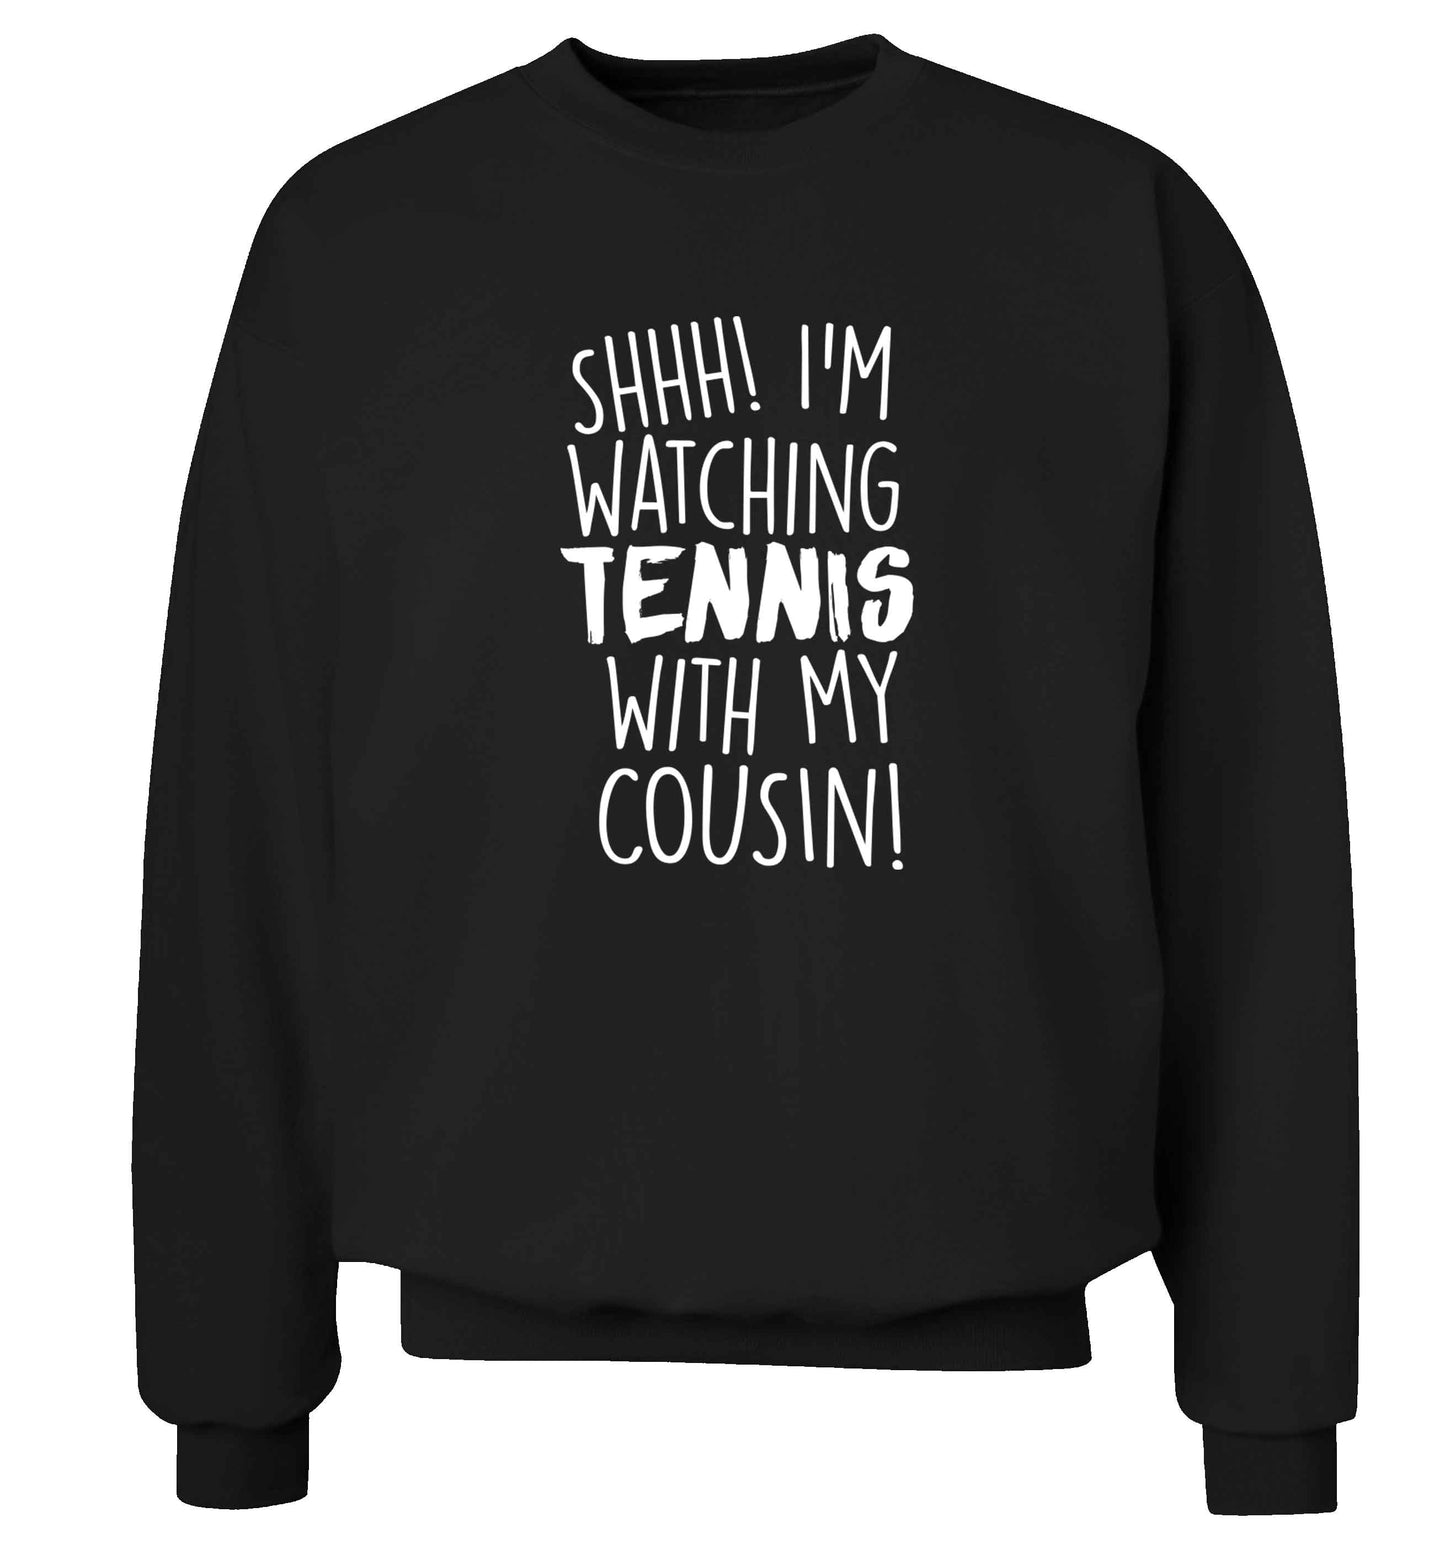 Shh! I'm watching tennis with my cousin! Adult's unisex black Sweater 2XL